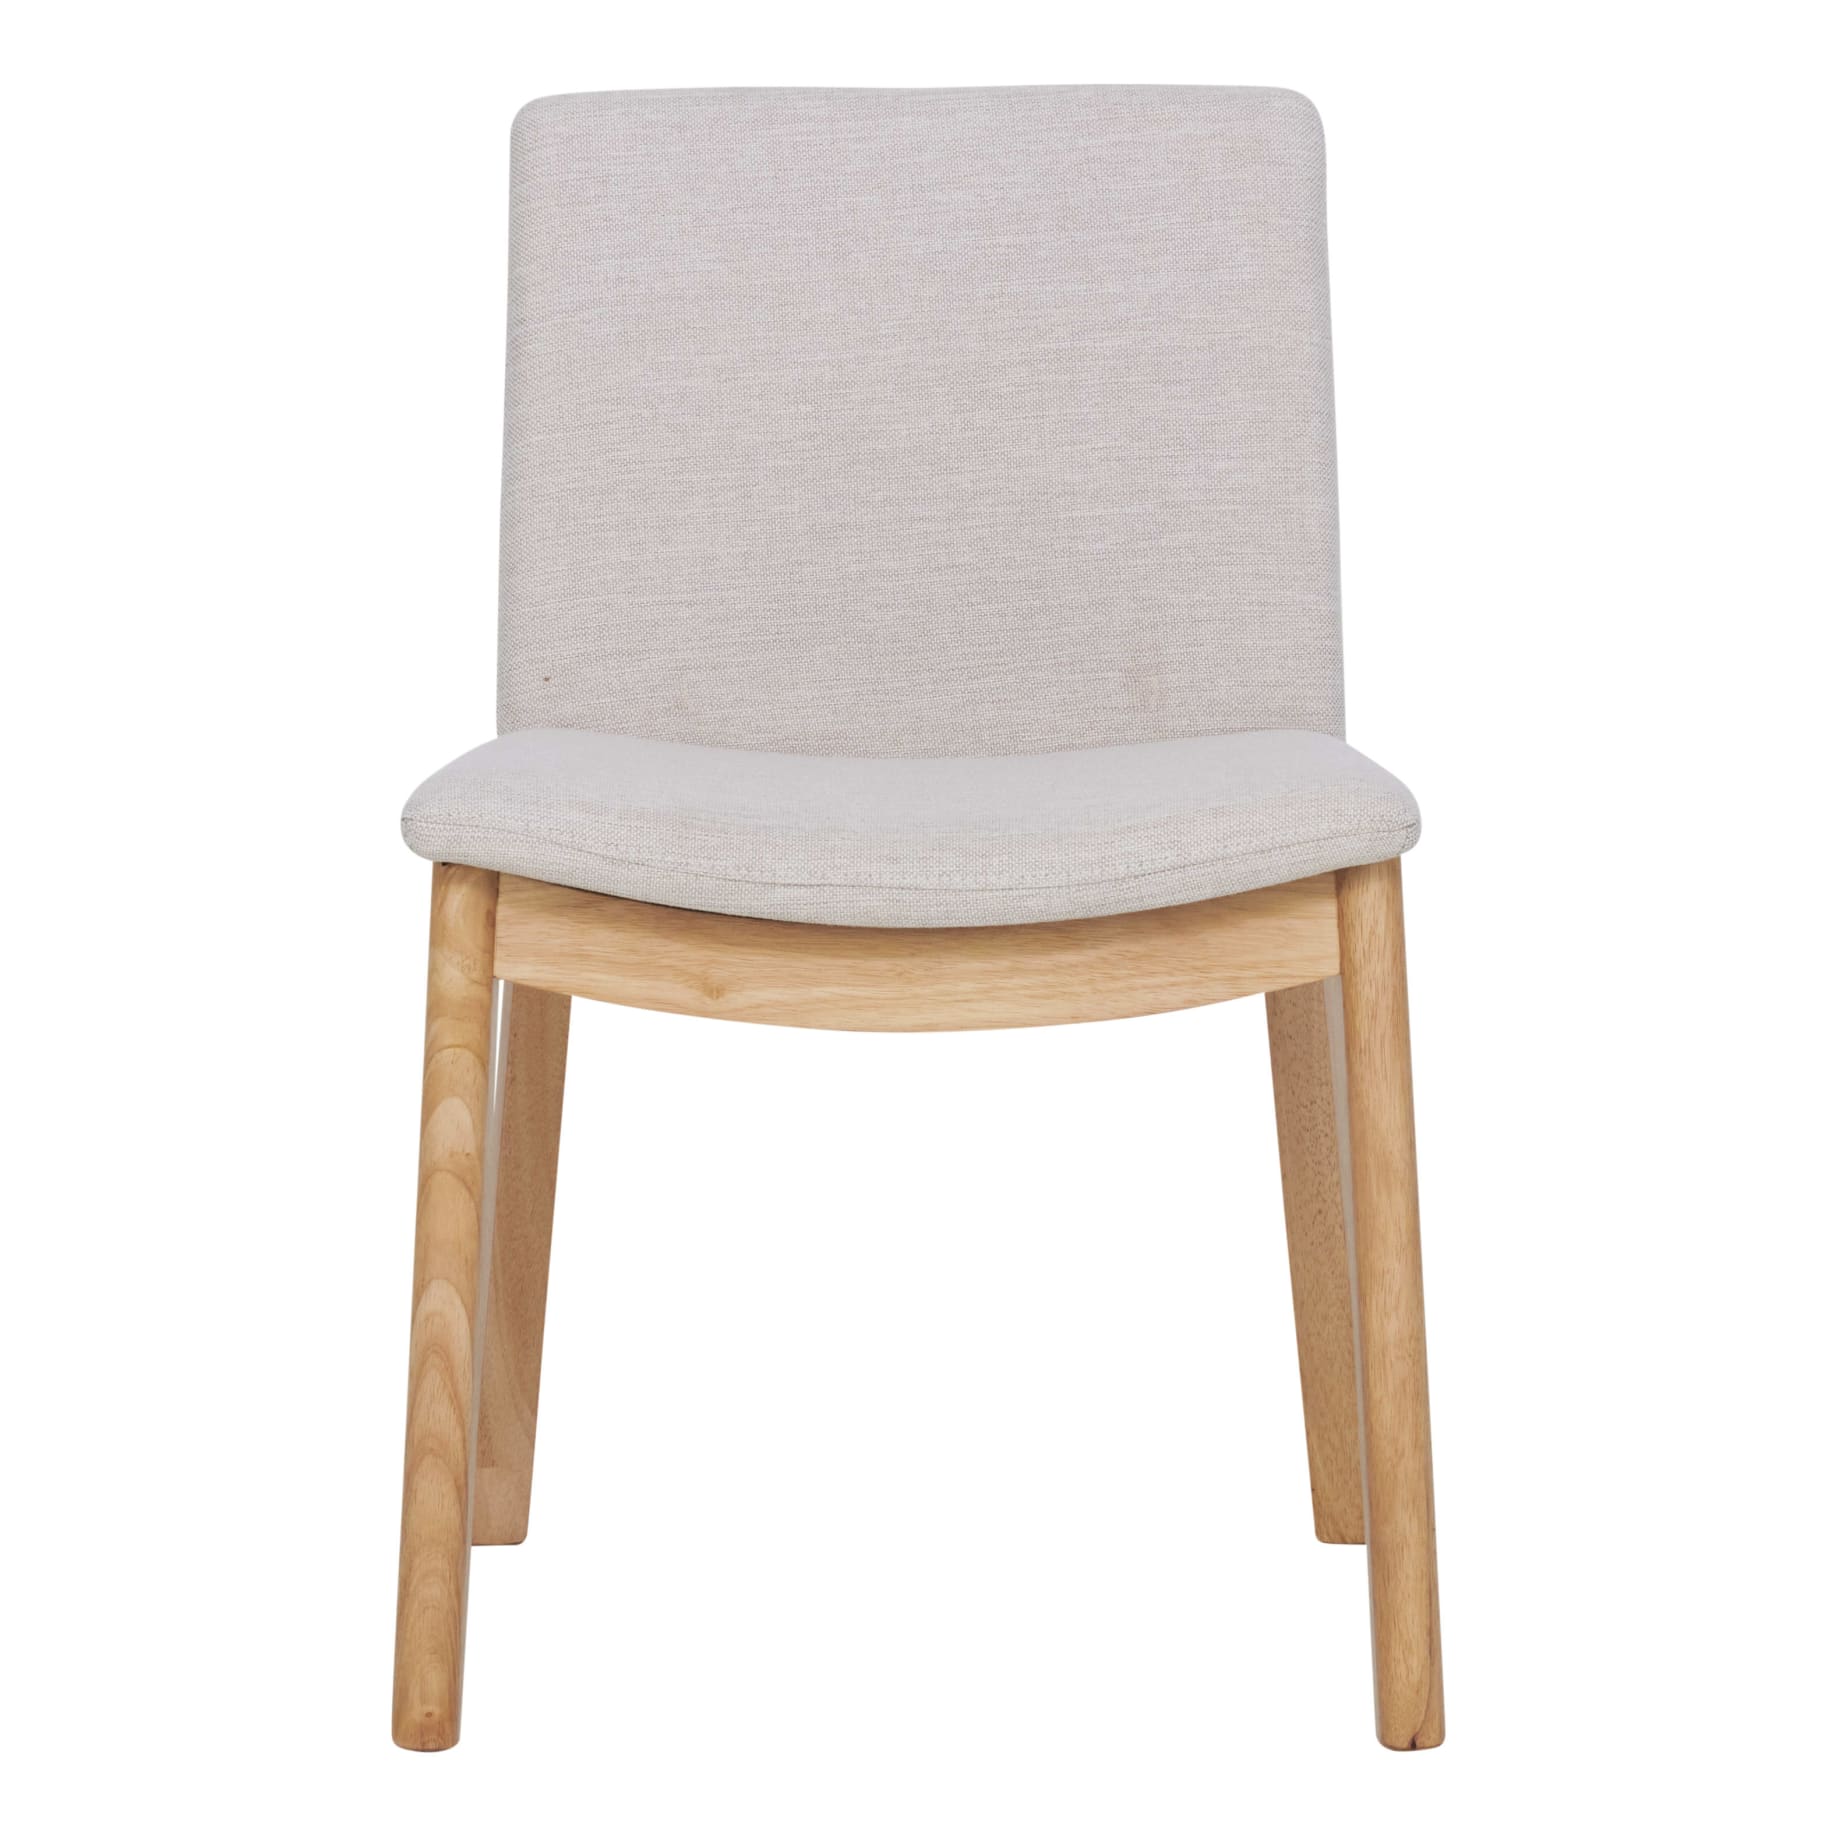 Everest Dining Chair in City Beige / Oak Stain